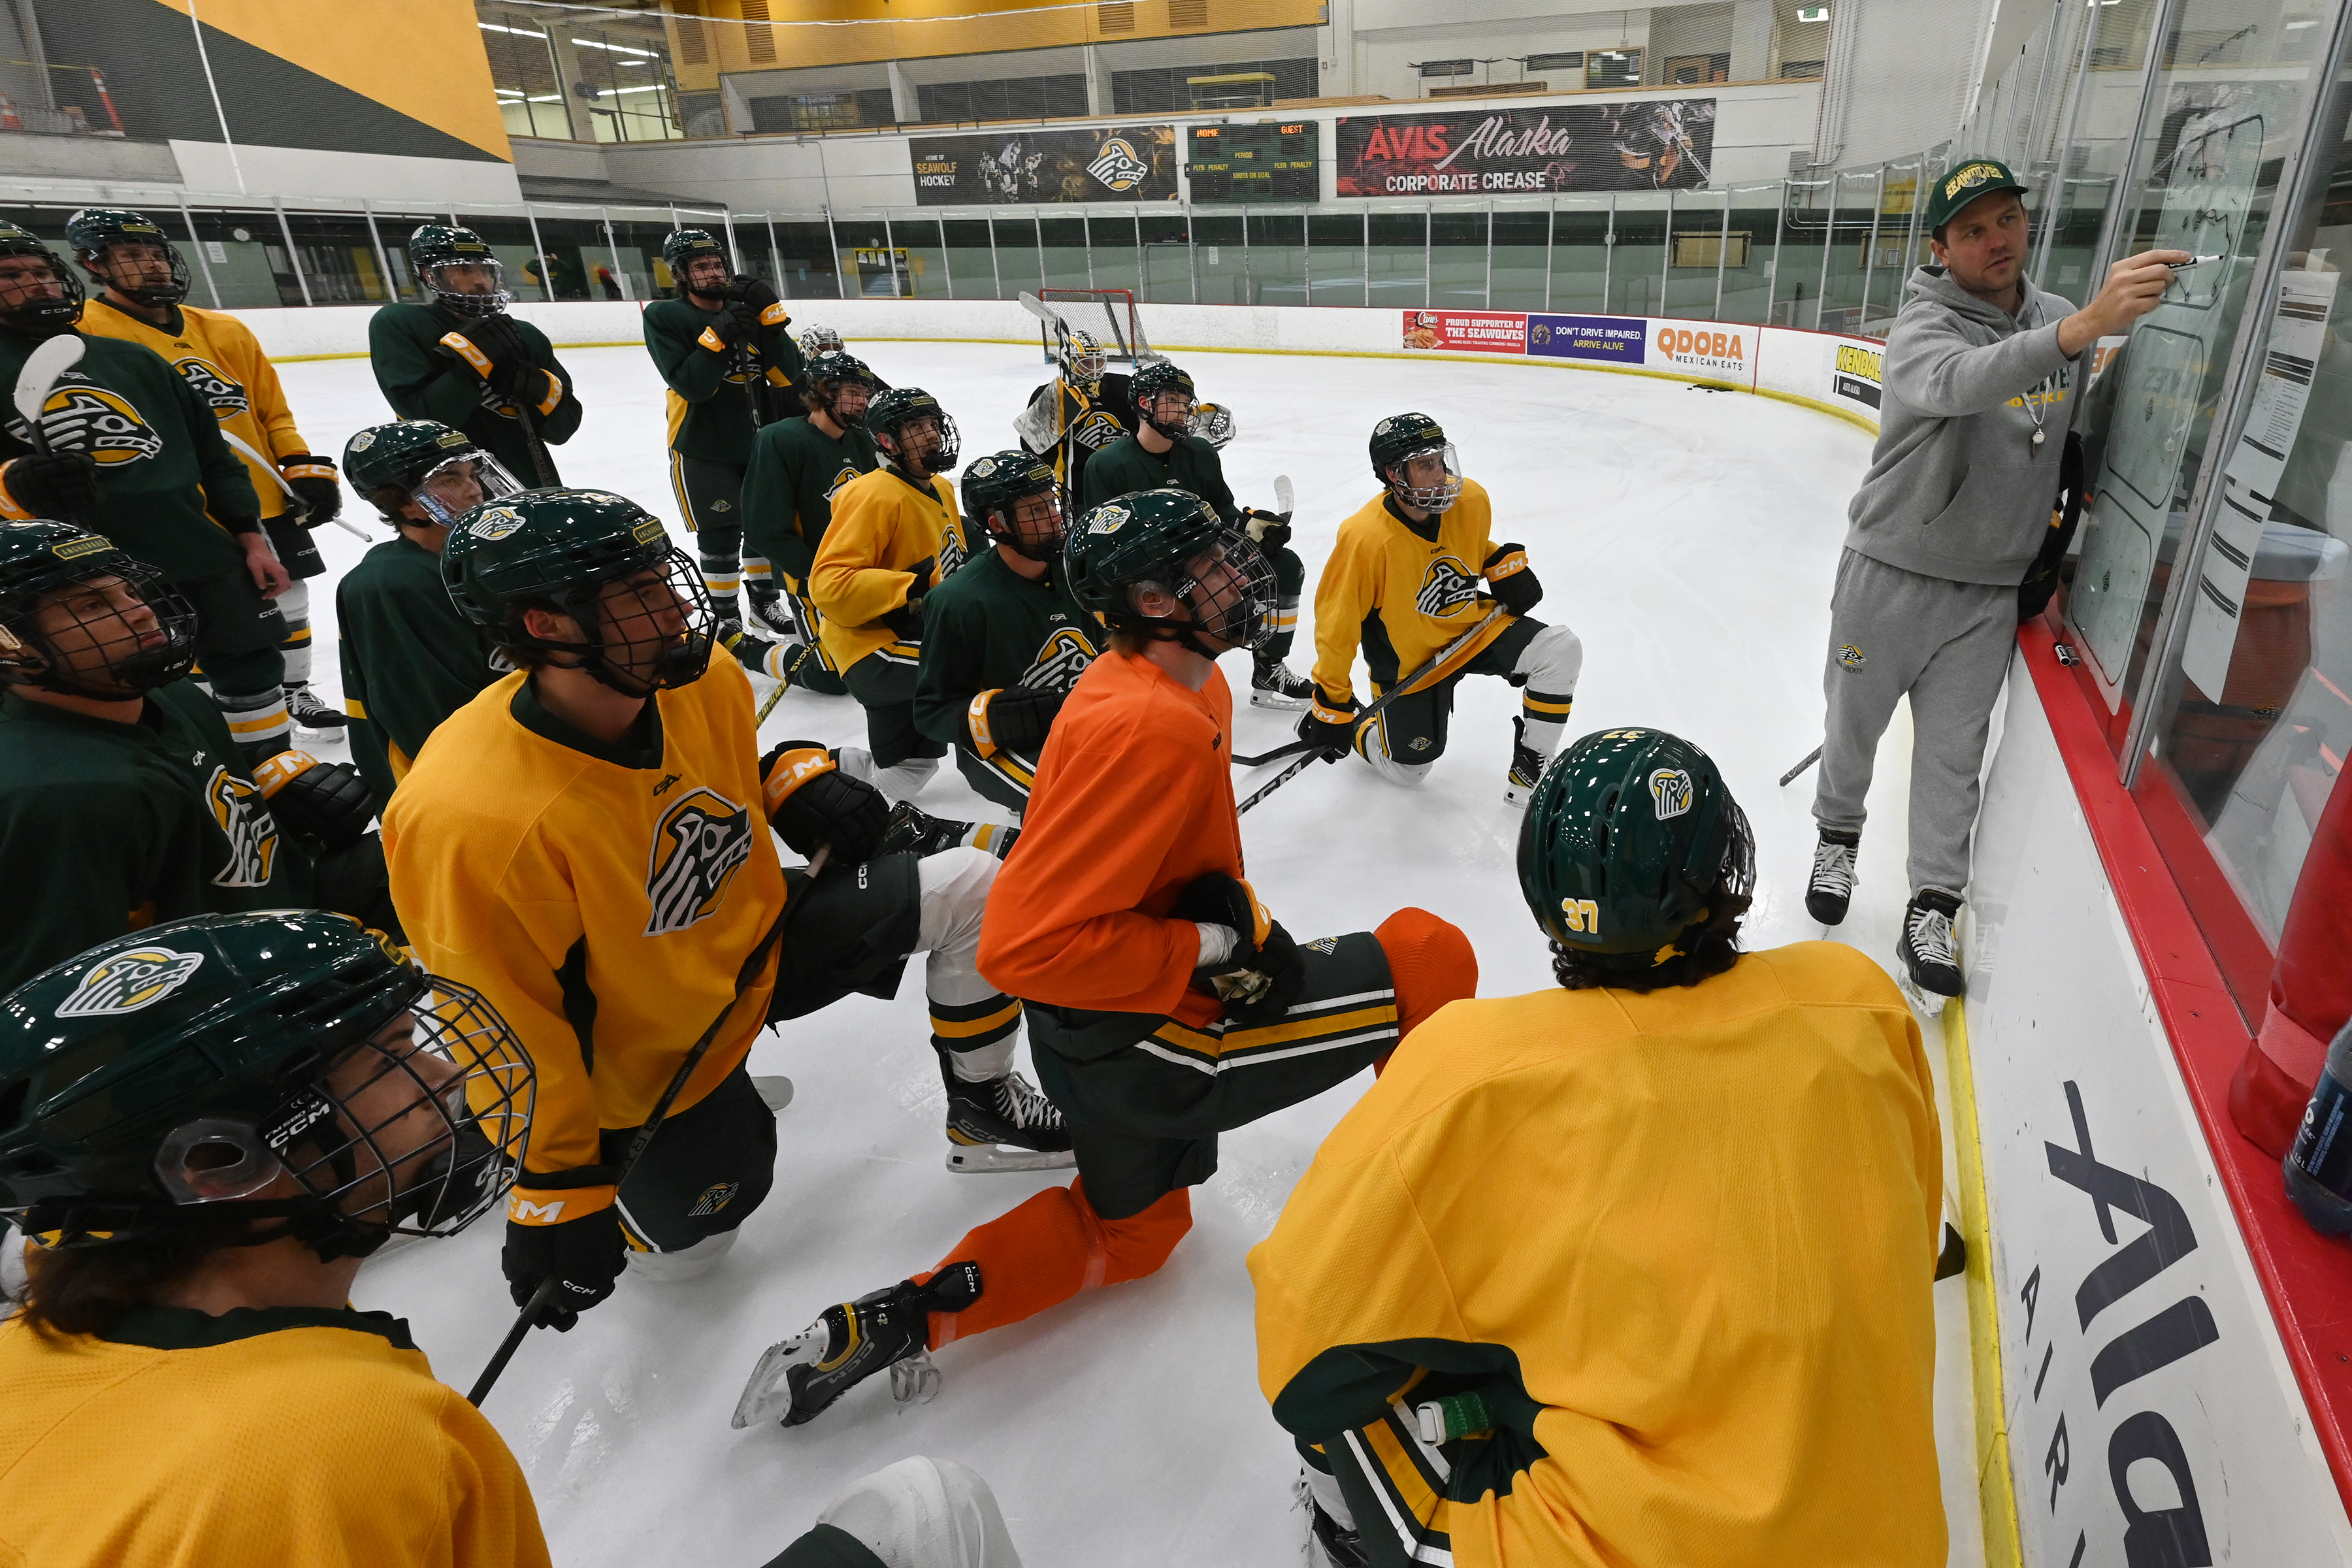 UAA hockey program plans to return for 2022-23 season after $3 million  fundraising effort - Anchorage Daily News